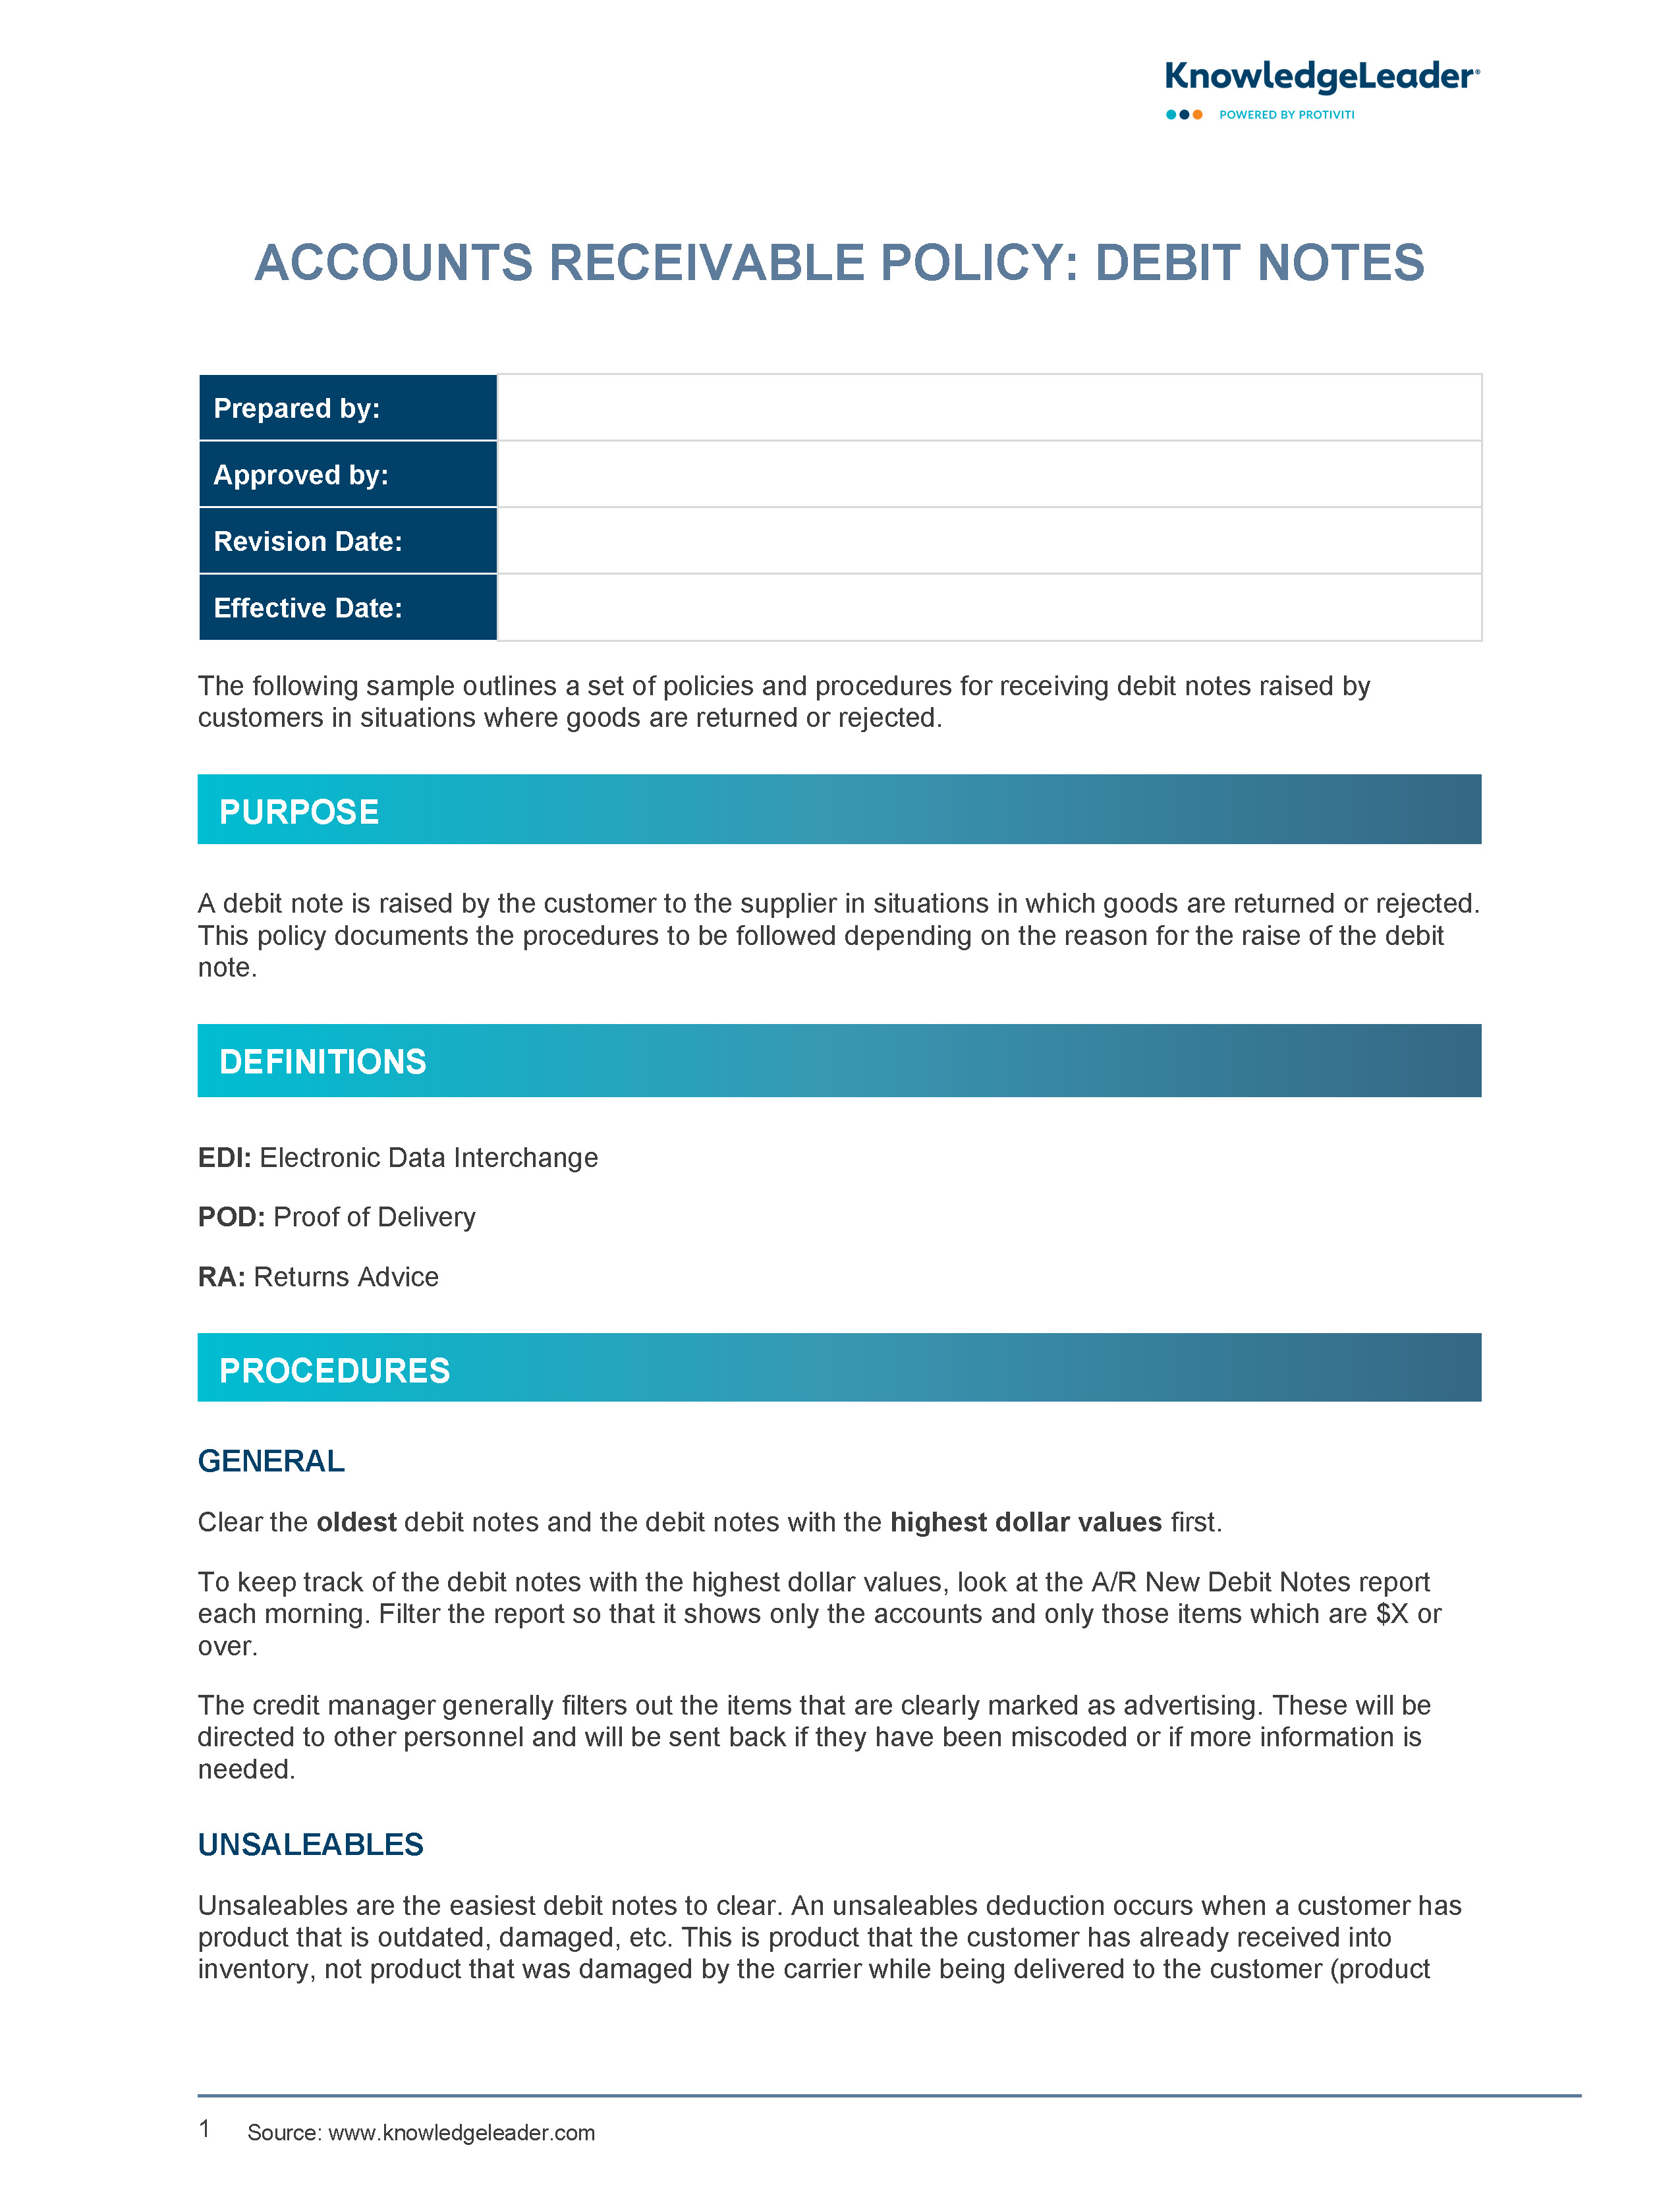 Screenshot of the first page of Accounts Receivable Policy - Debit Notes